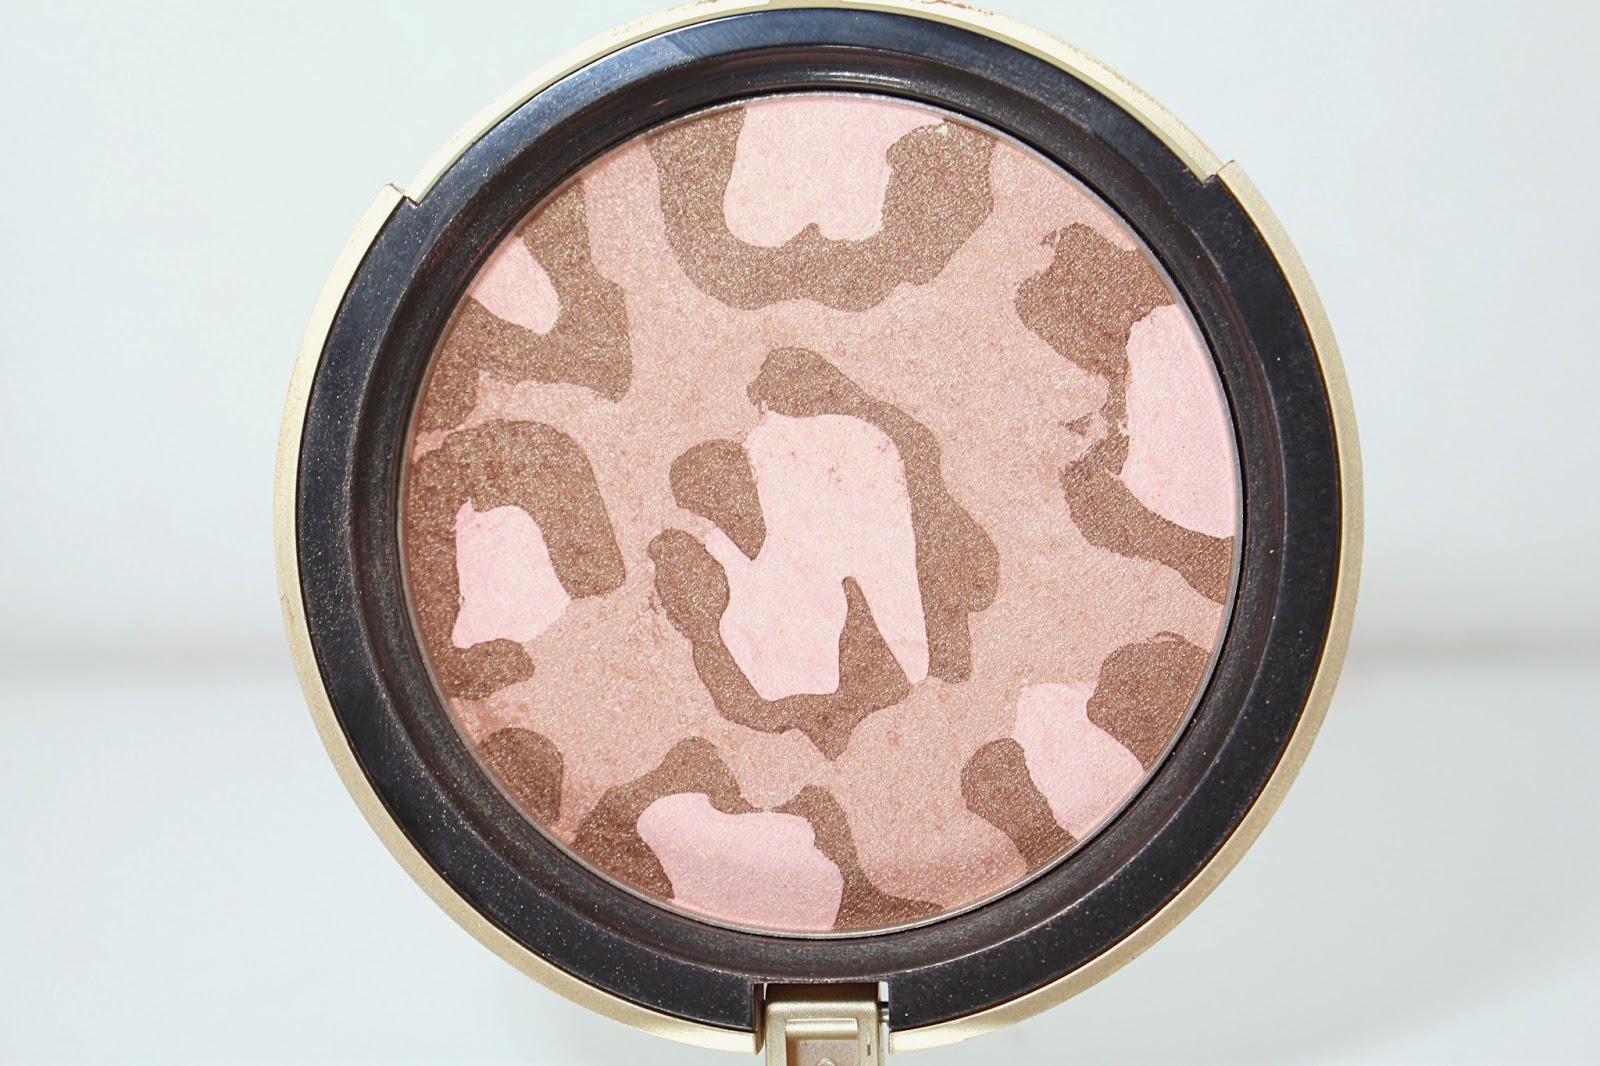 http://www.beautybylou.com/2014/10/pink-leopard-too-faced.html